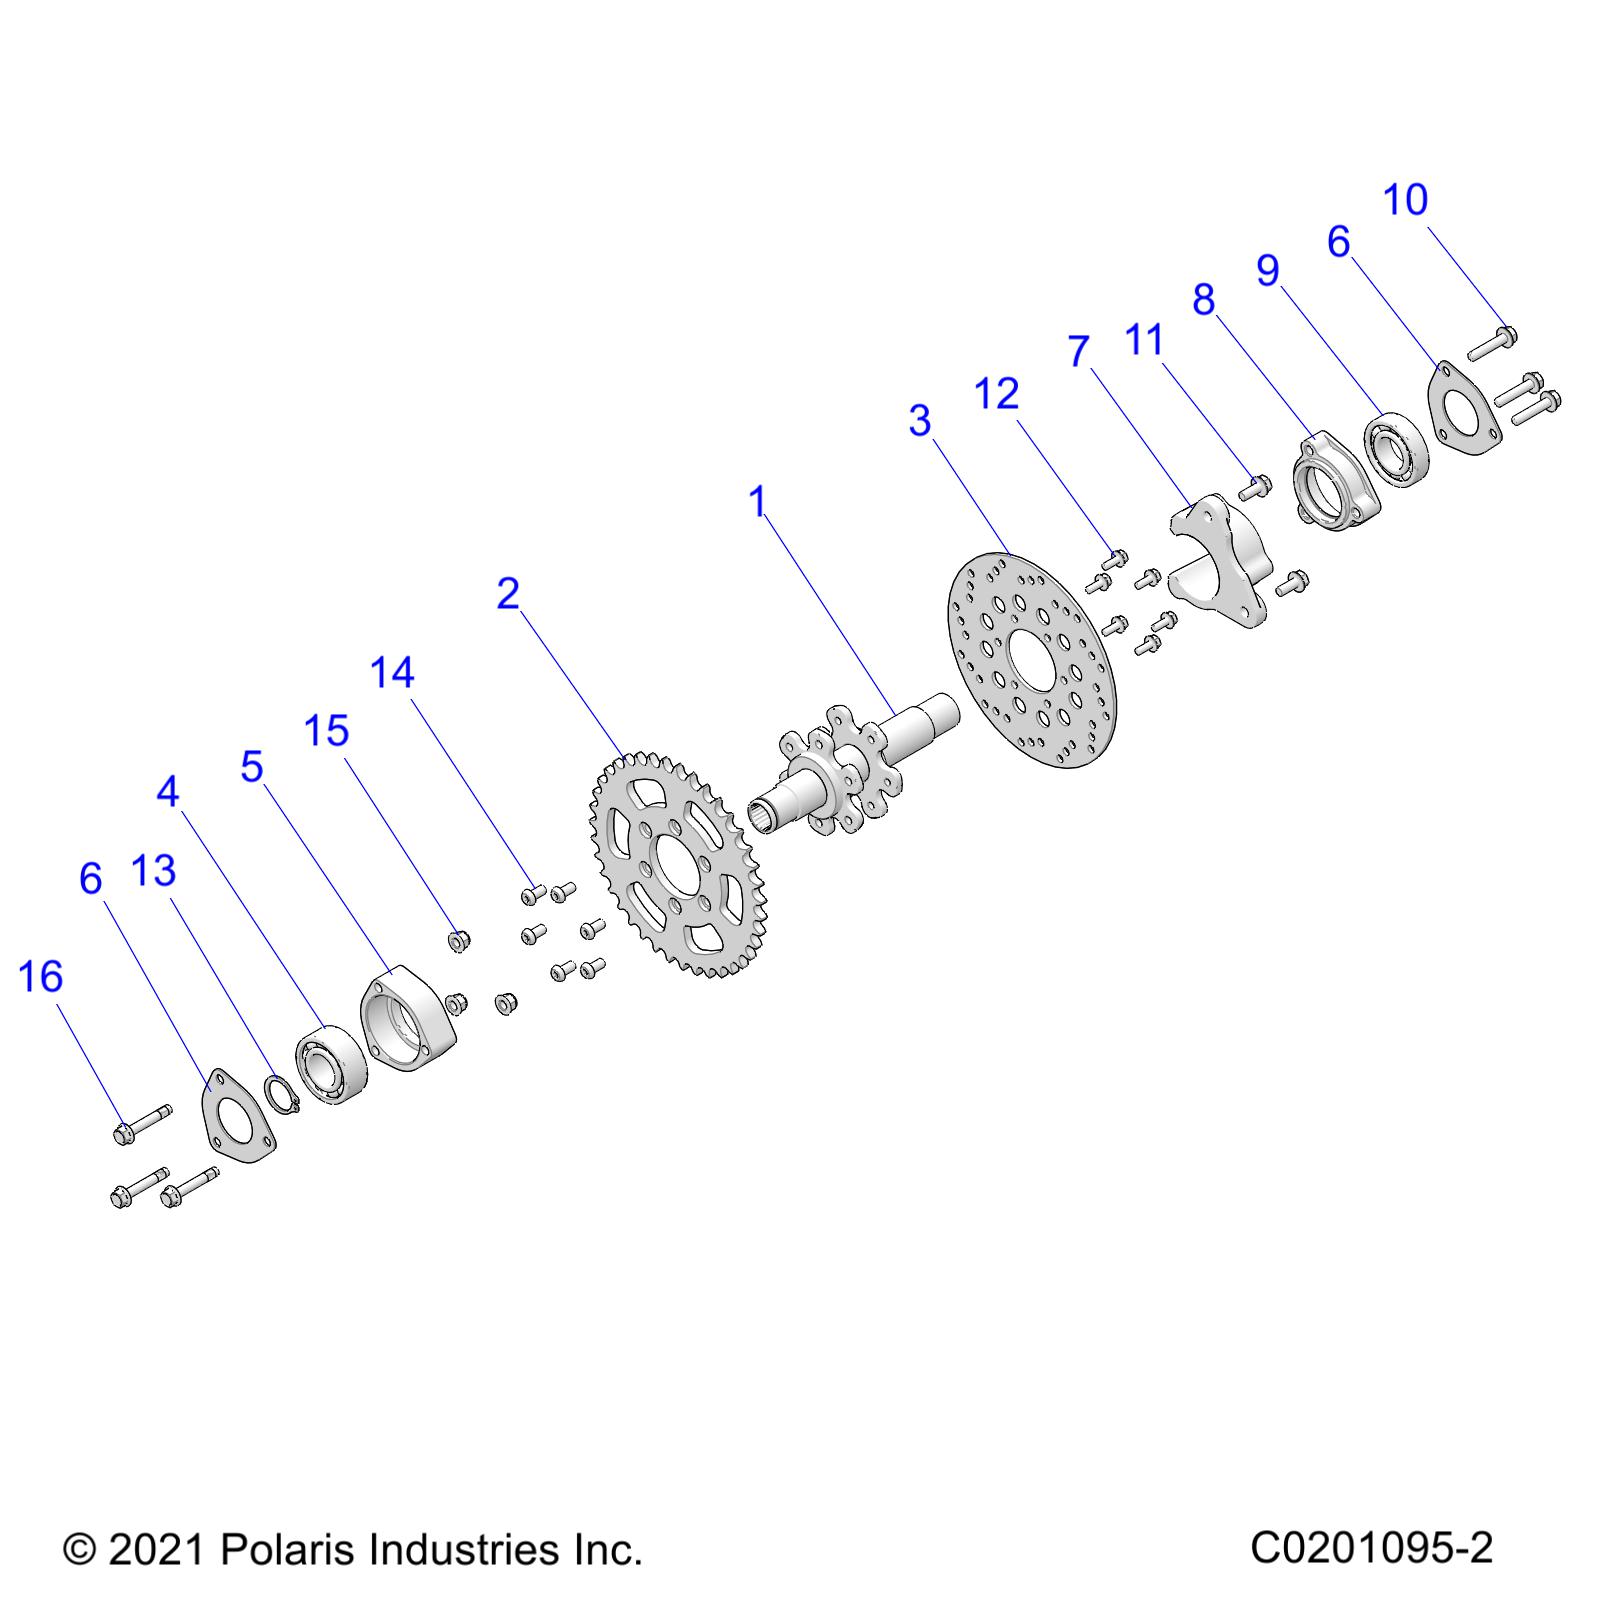 Part Number : 5263896 RETAINER PLATE  BEARING